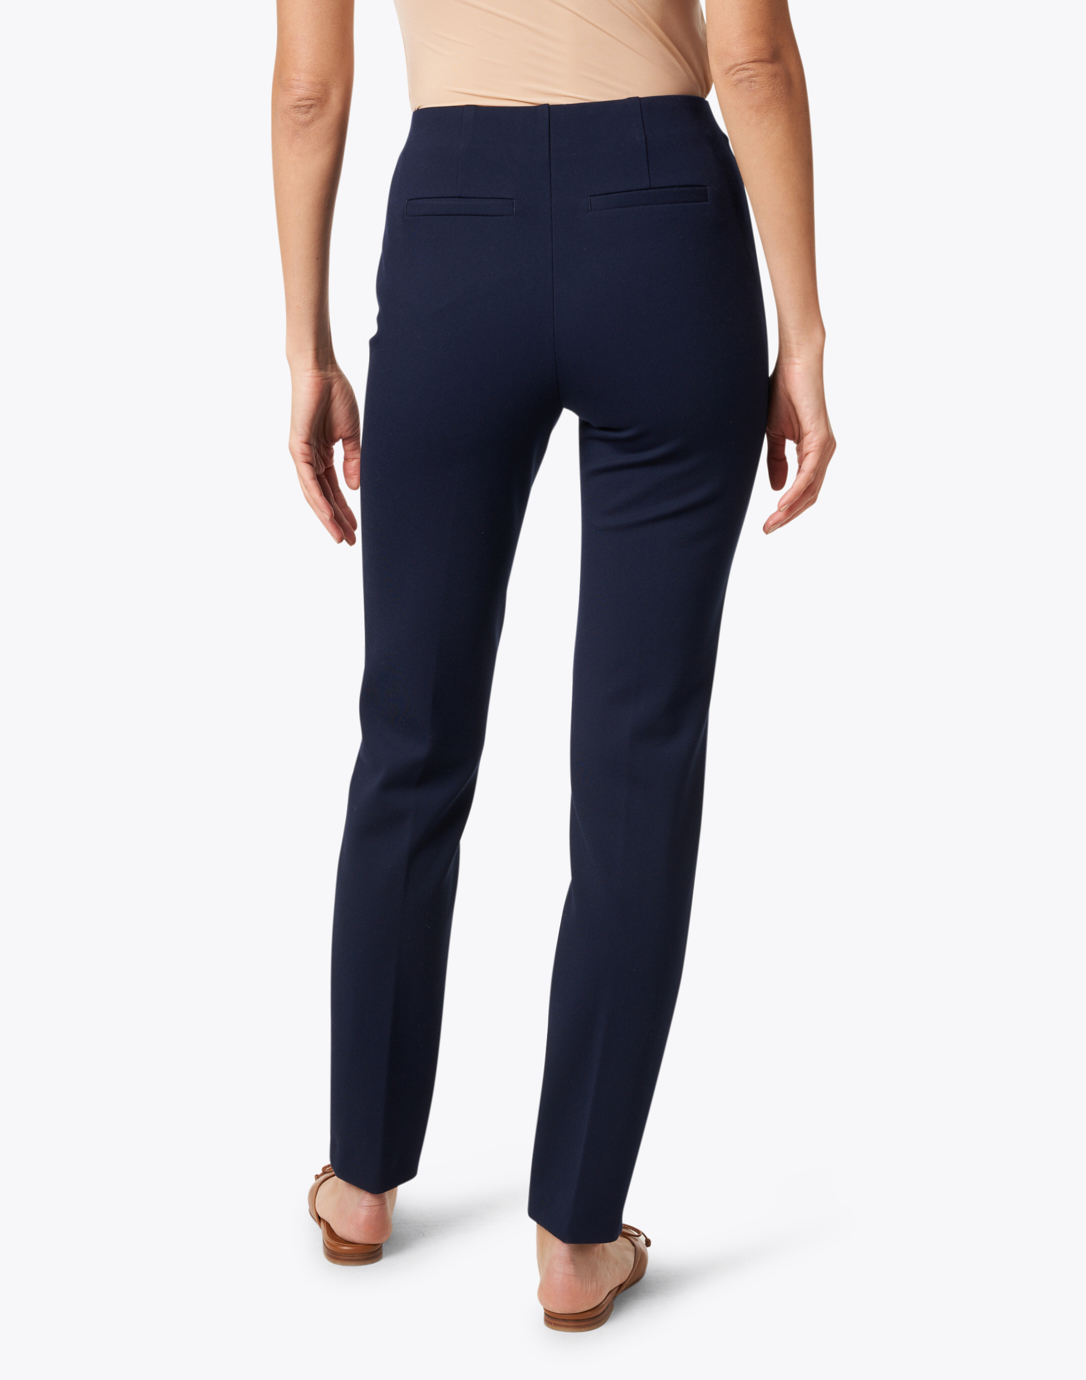 Springfield Navy Power Stretch Pull On Pant